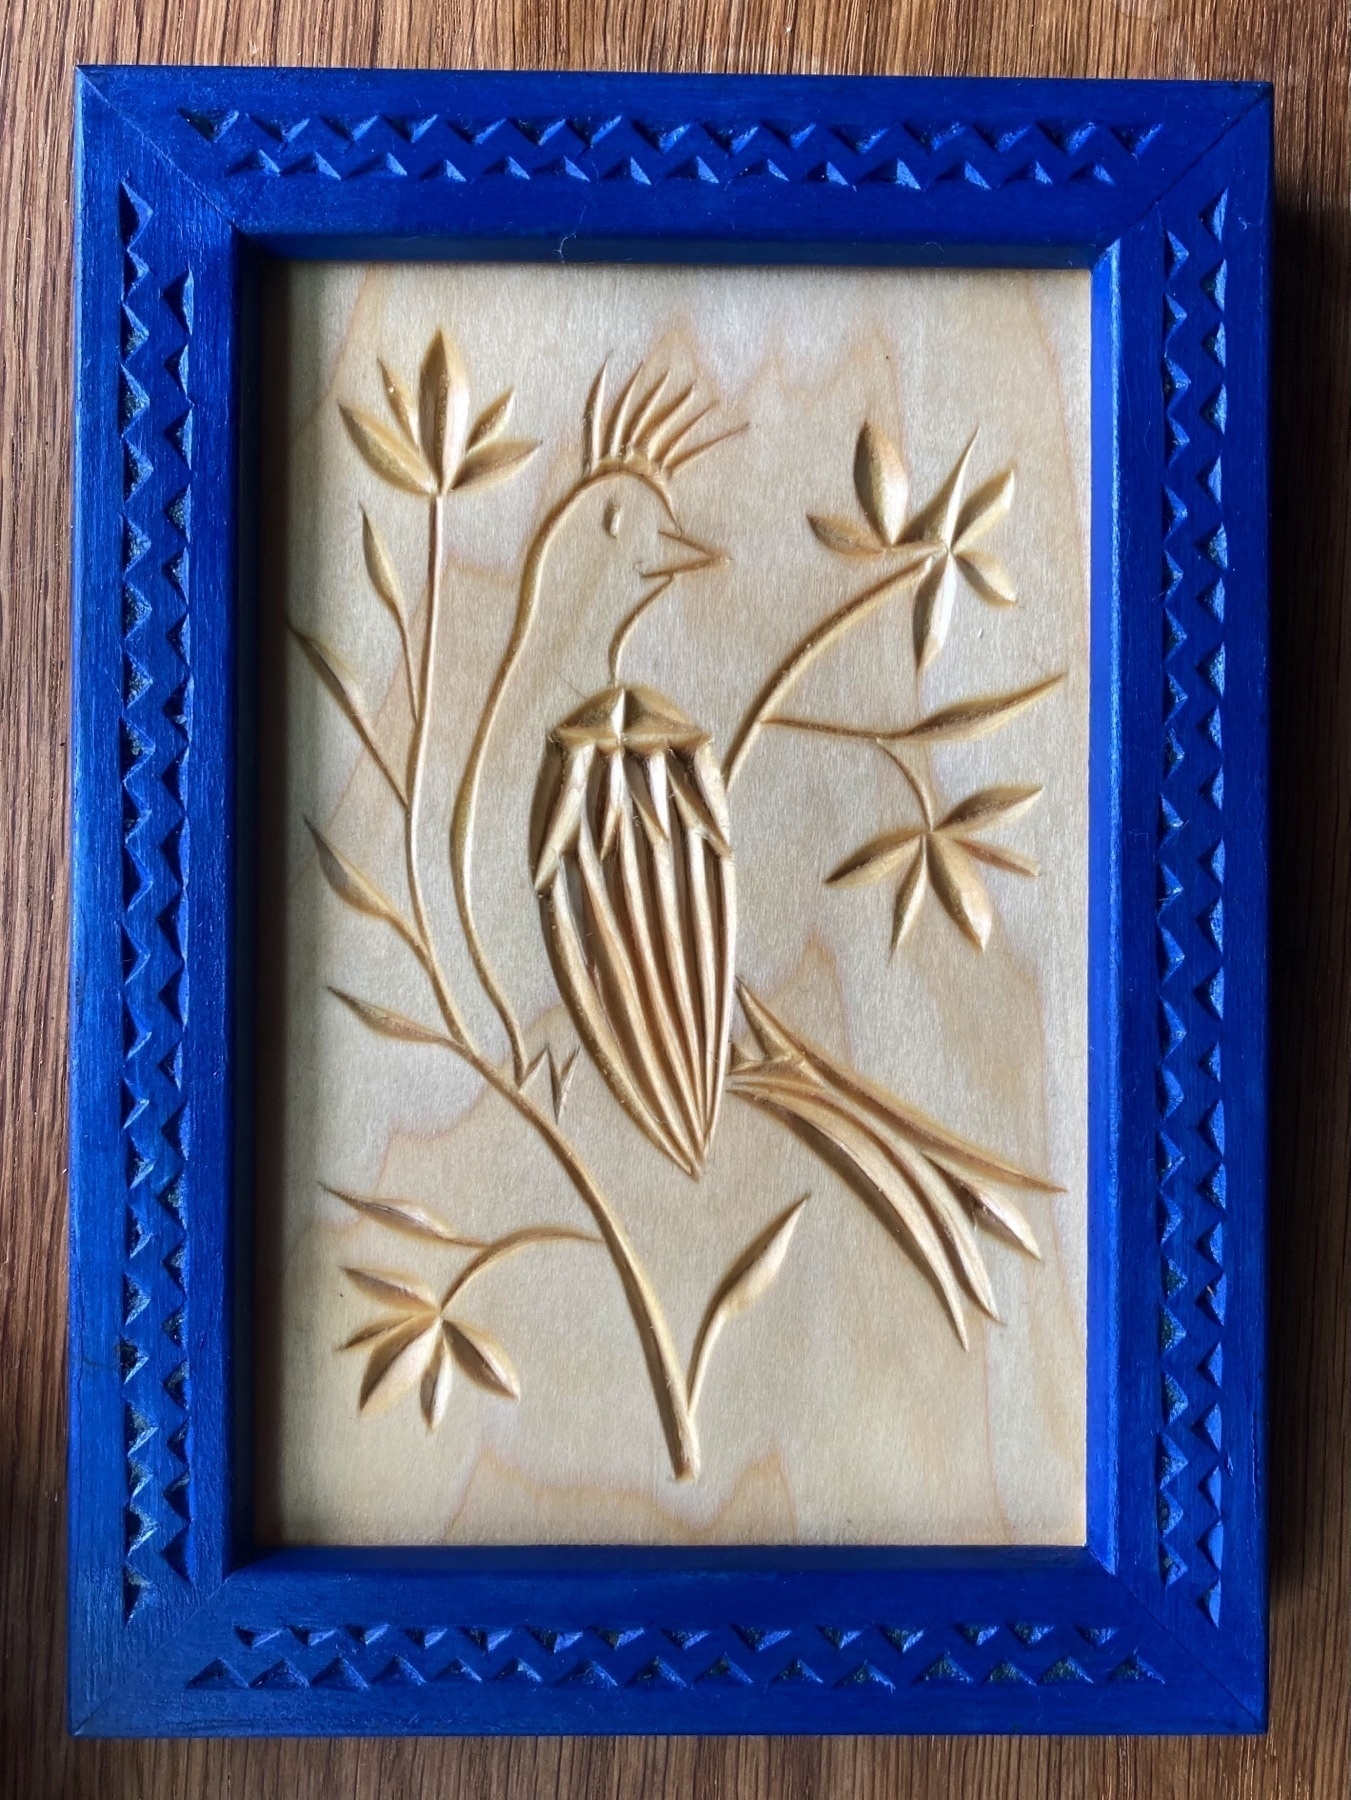 chip carving of crowned bird surrounded with flowers, blue frame carved with woven-triangle pattern